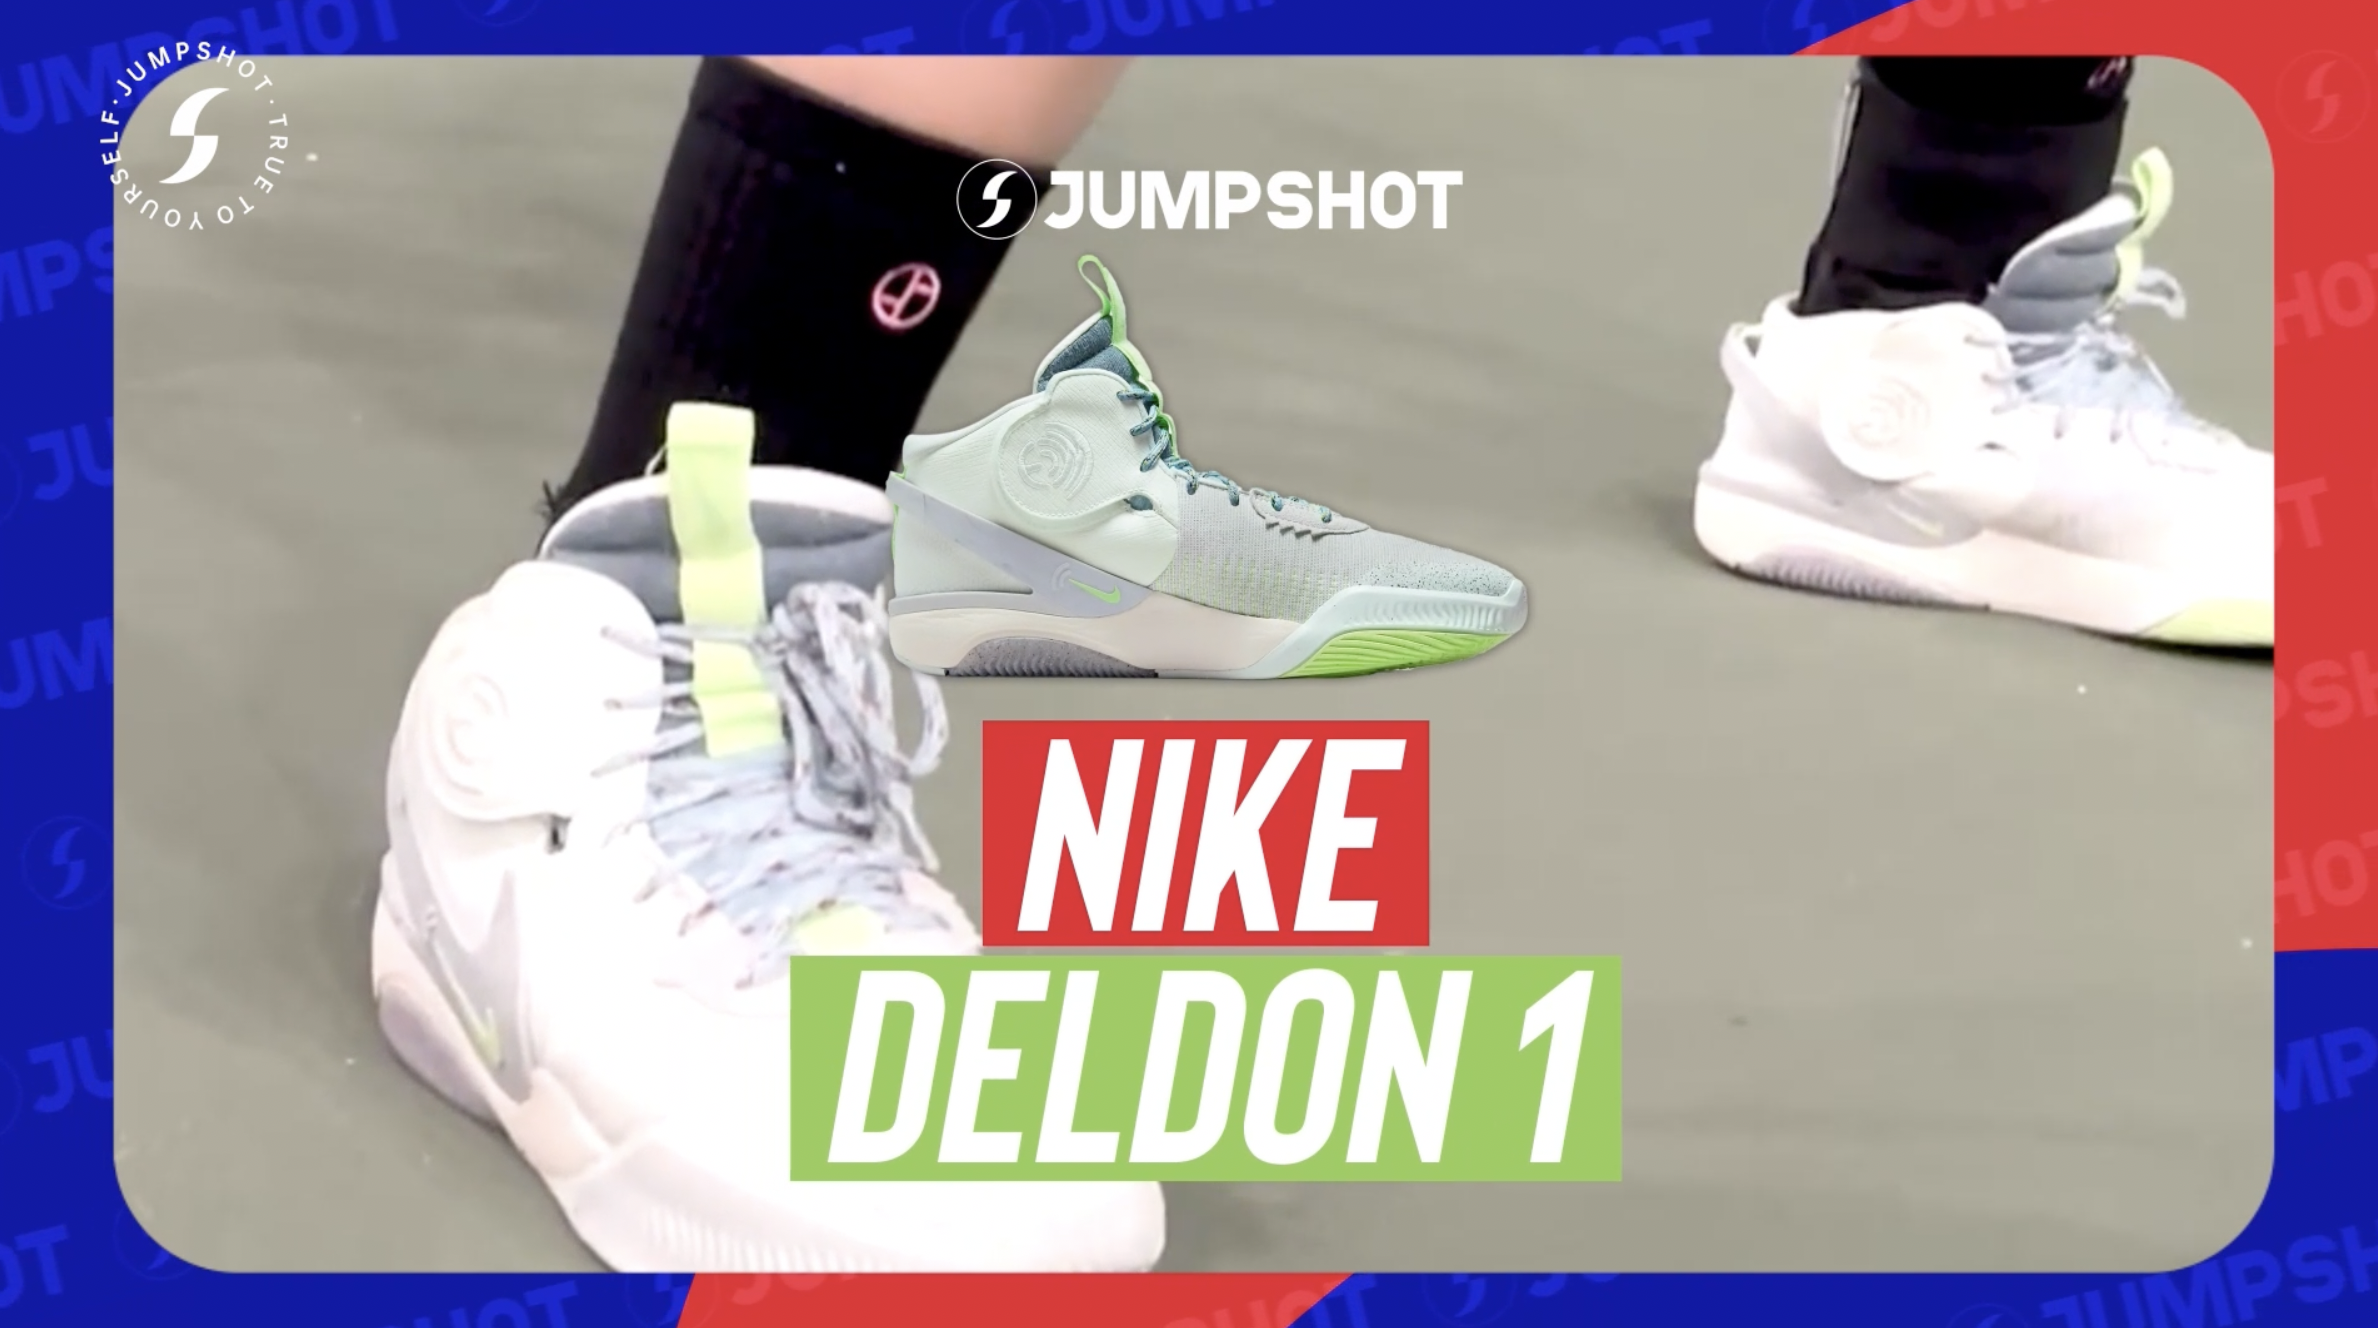 [WATCH NOW] JUMP: Nike Deldon 1 Performance Review